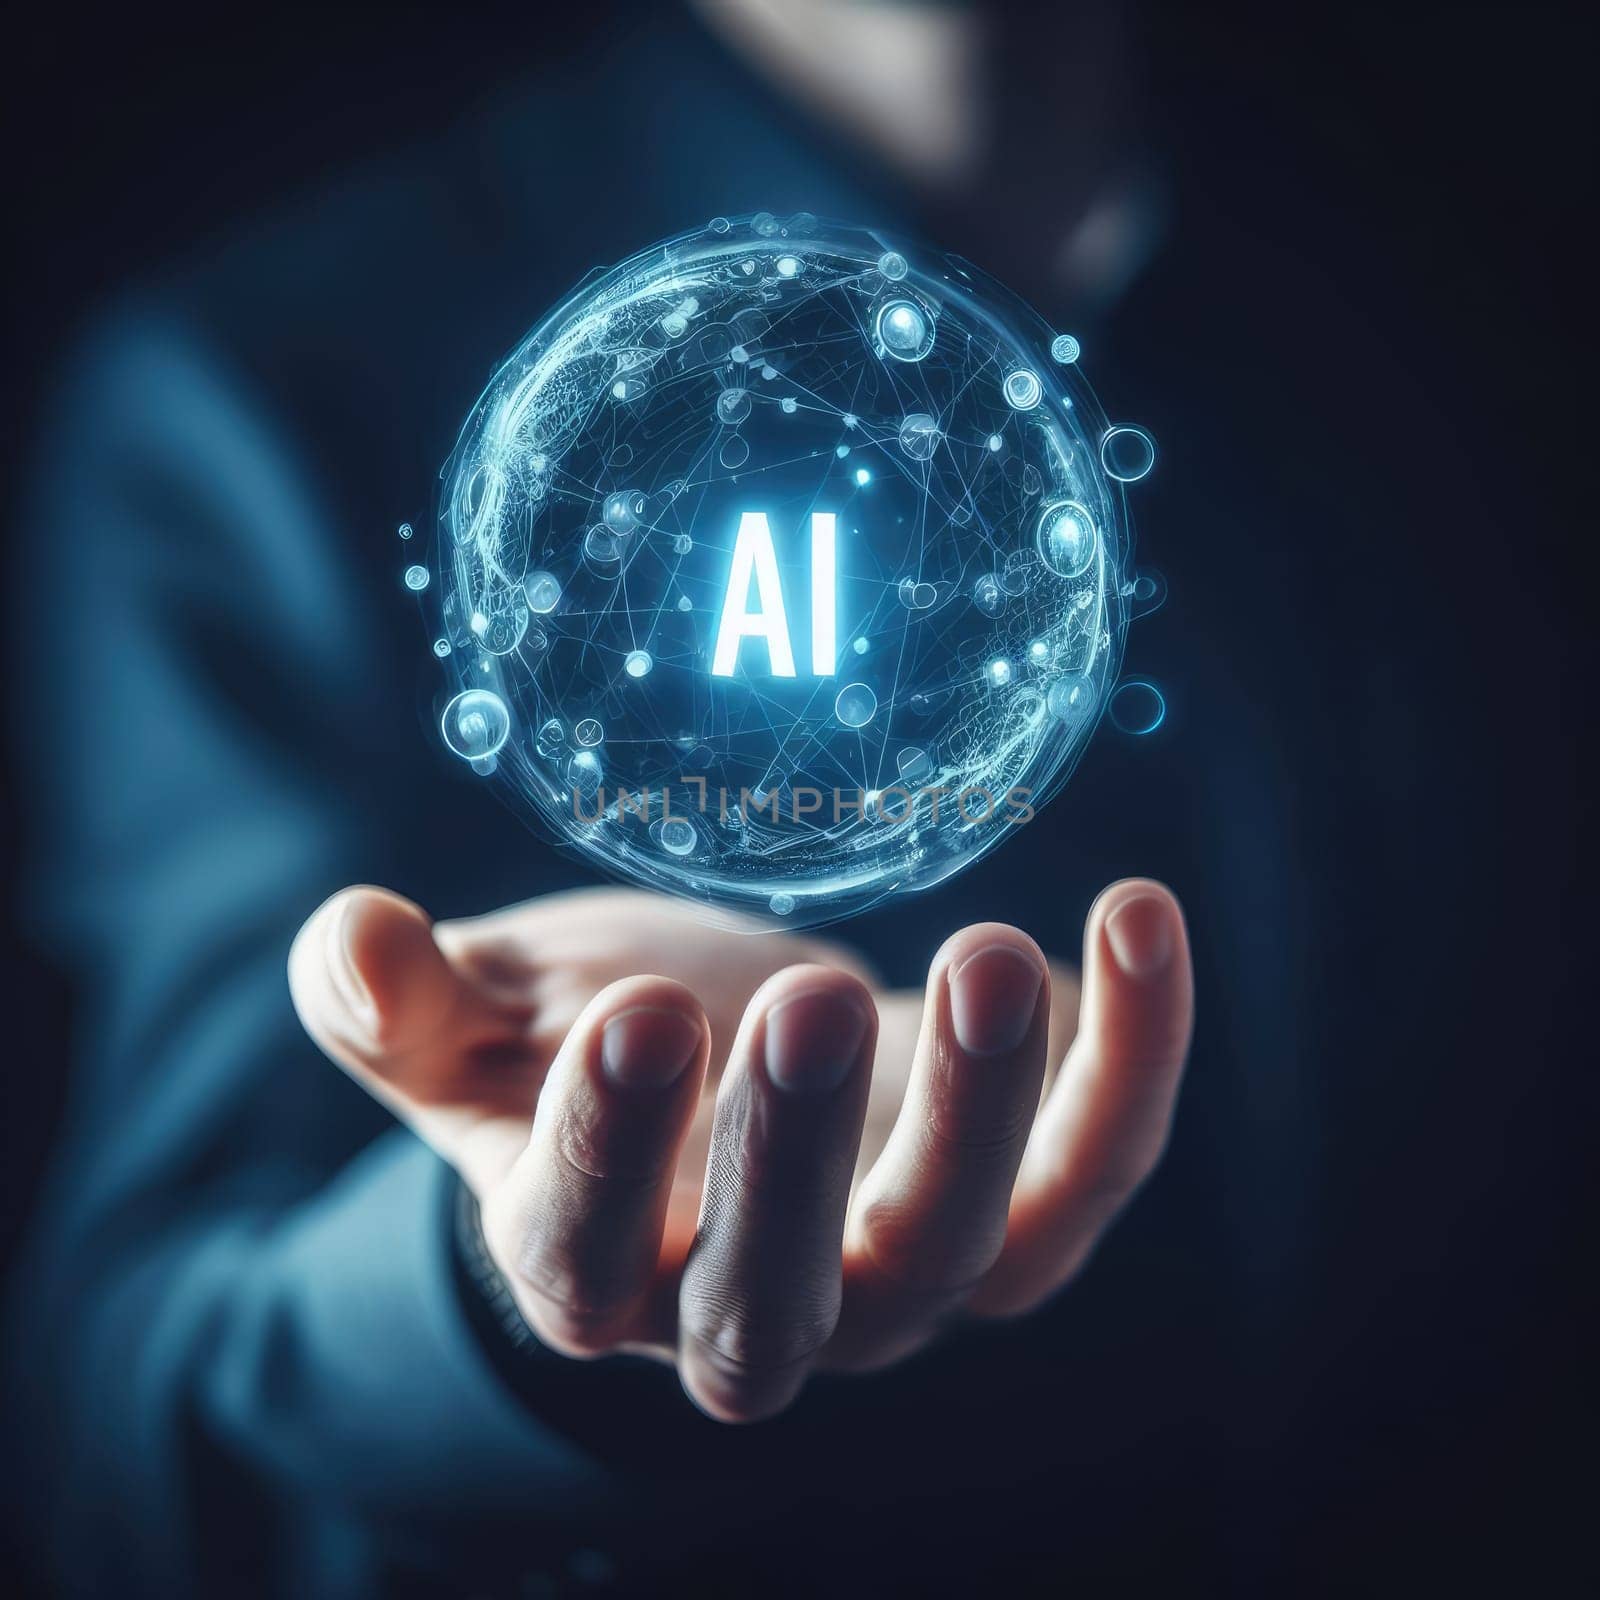 Man's hand holding an AI chat technology sign, symbolizing modern communication with chatbots, virtual assistants, and customer service by Kobysh